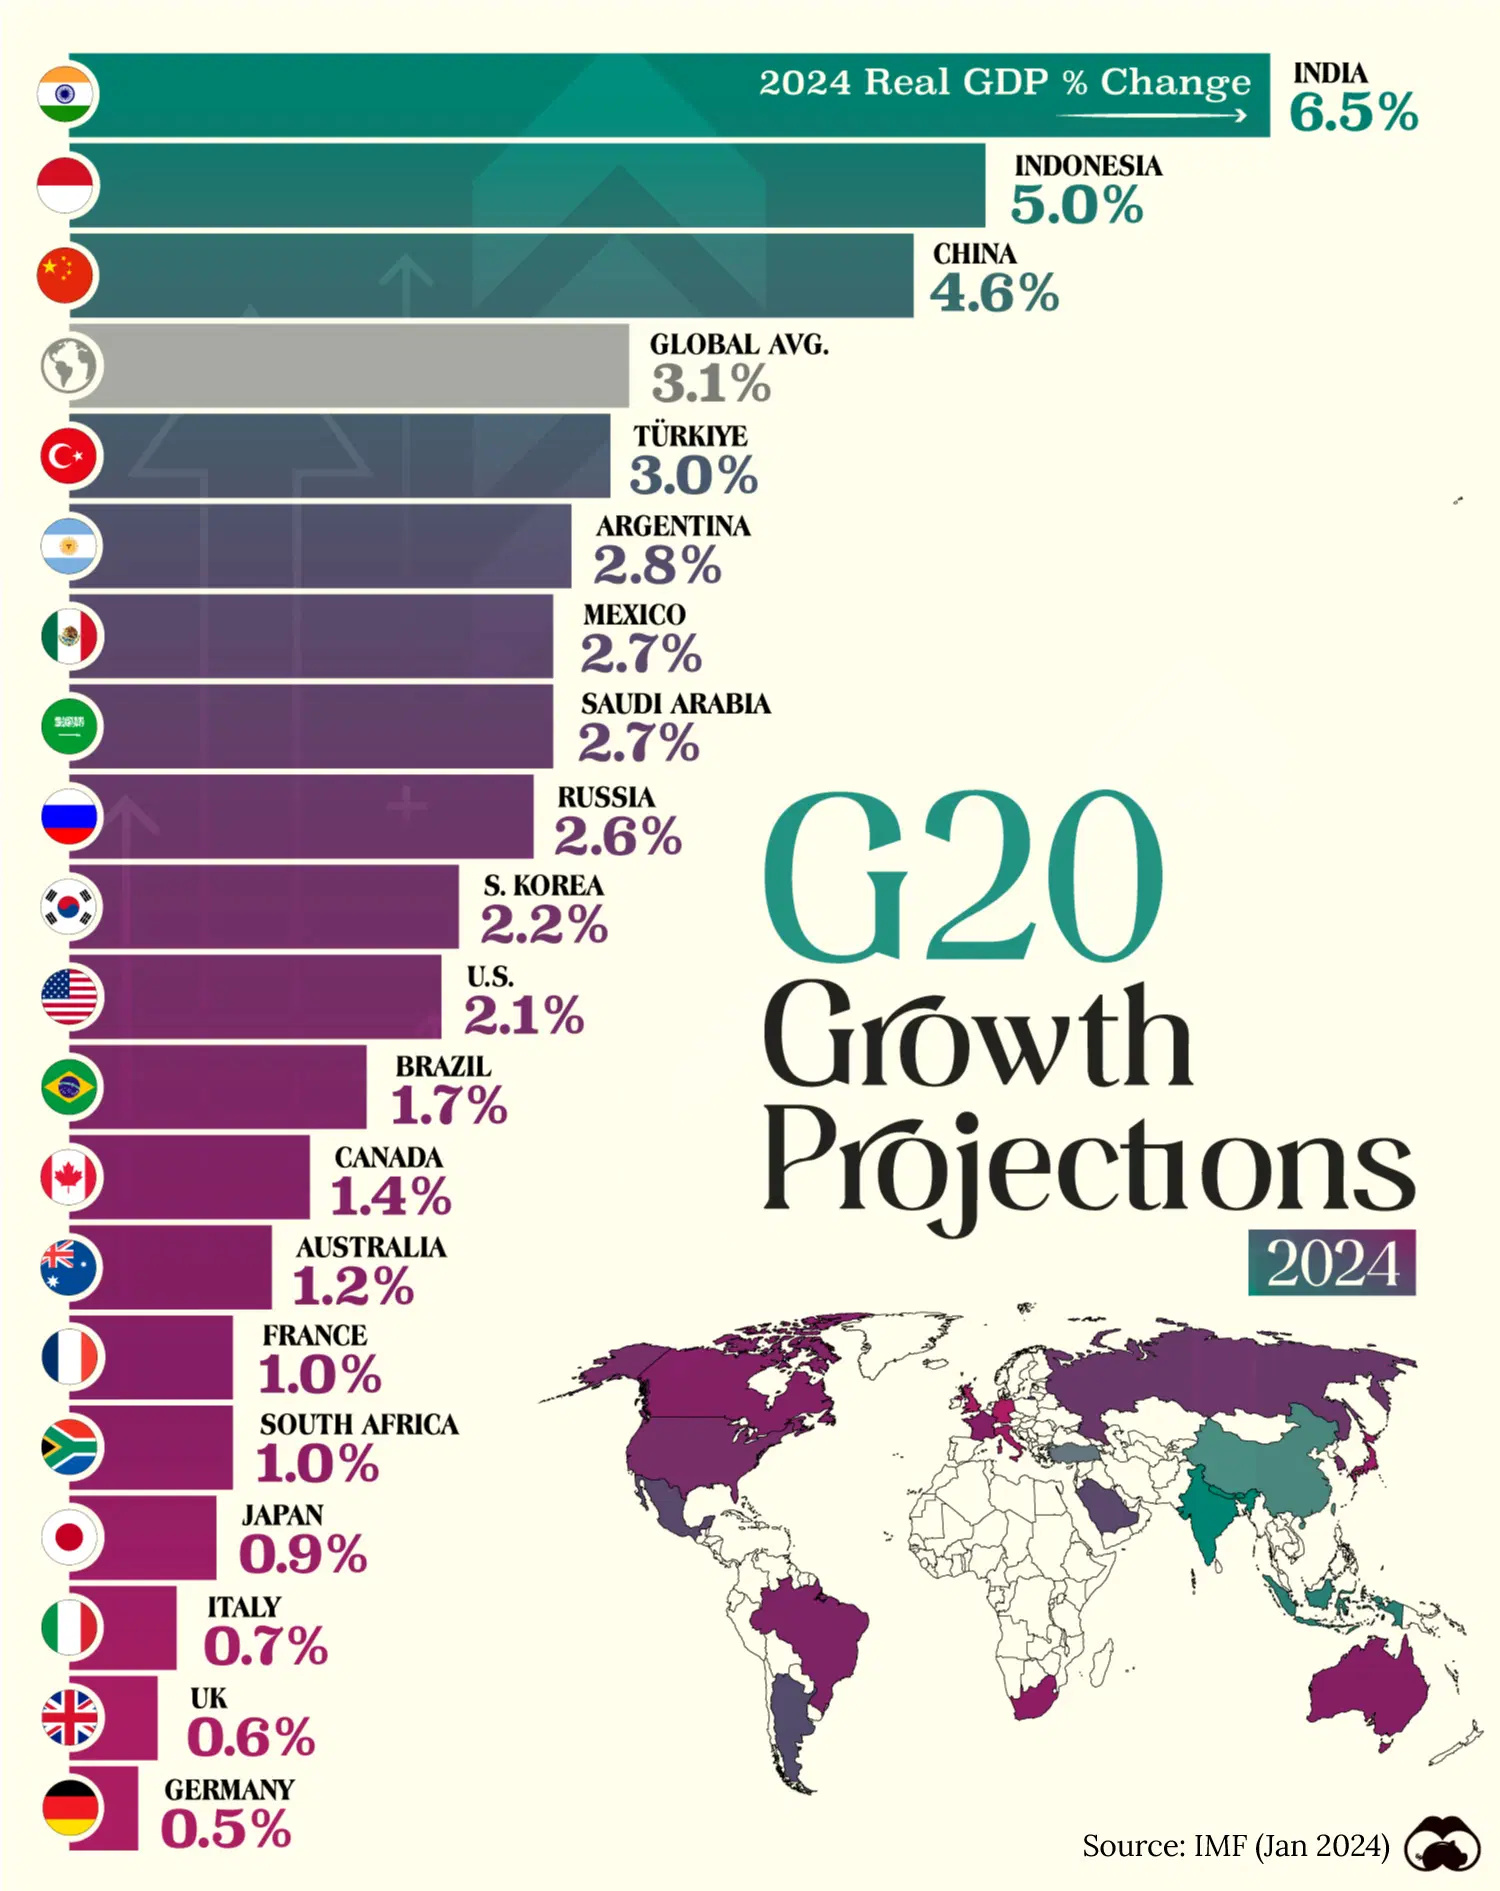 GDP Growth Projections for the G20 in 2024